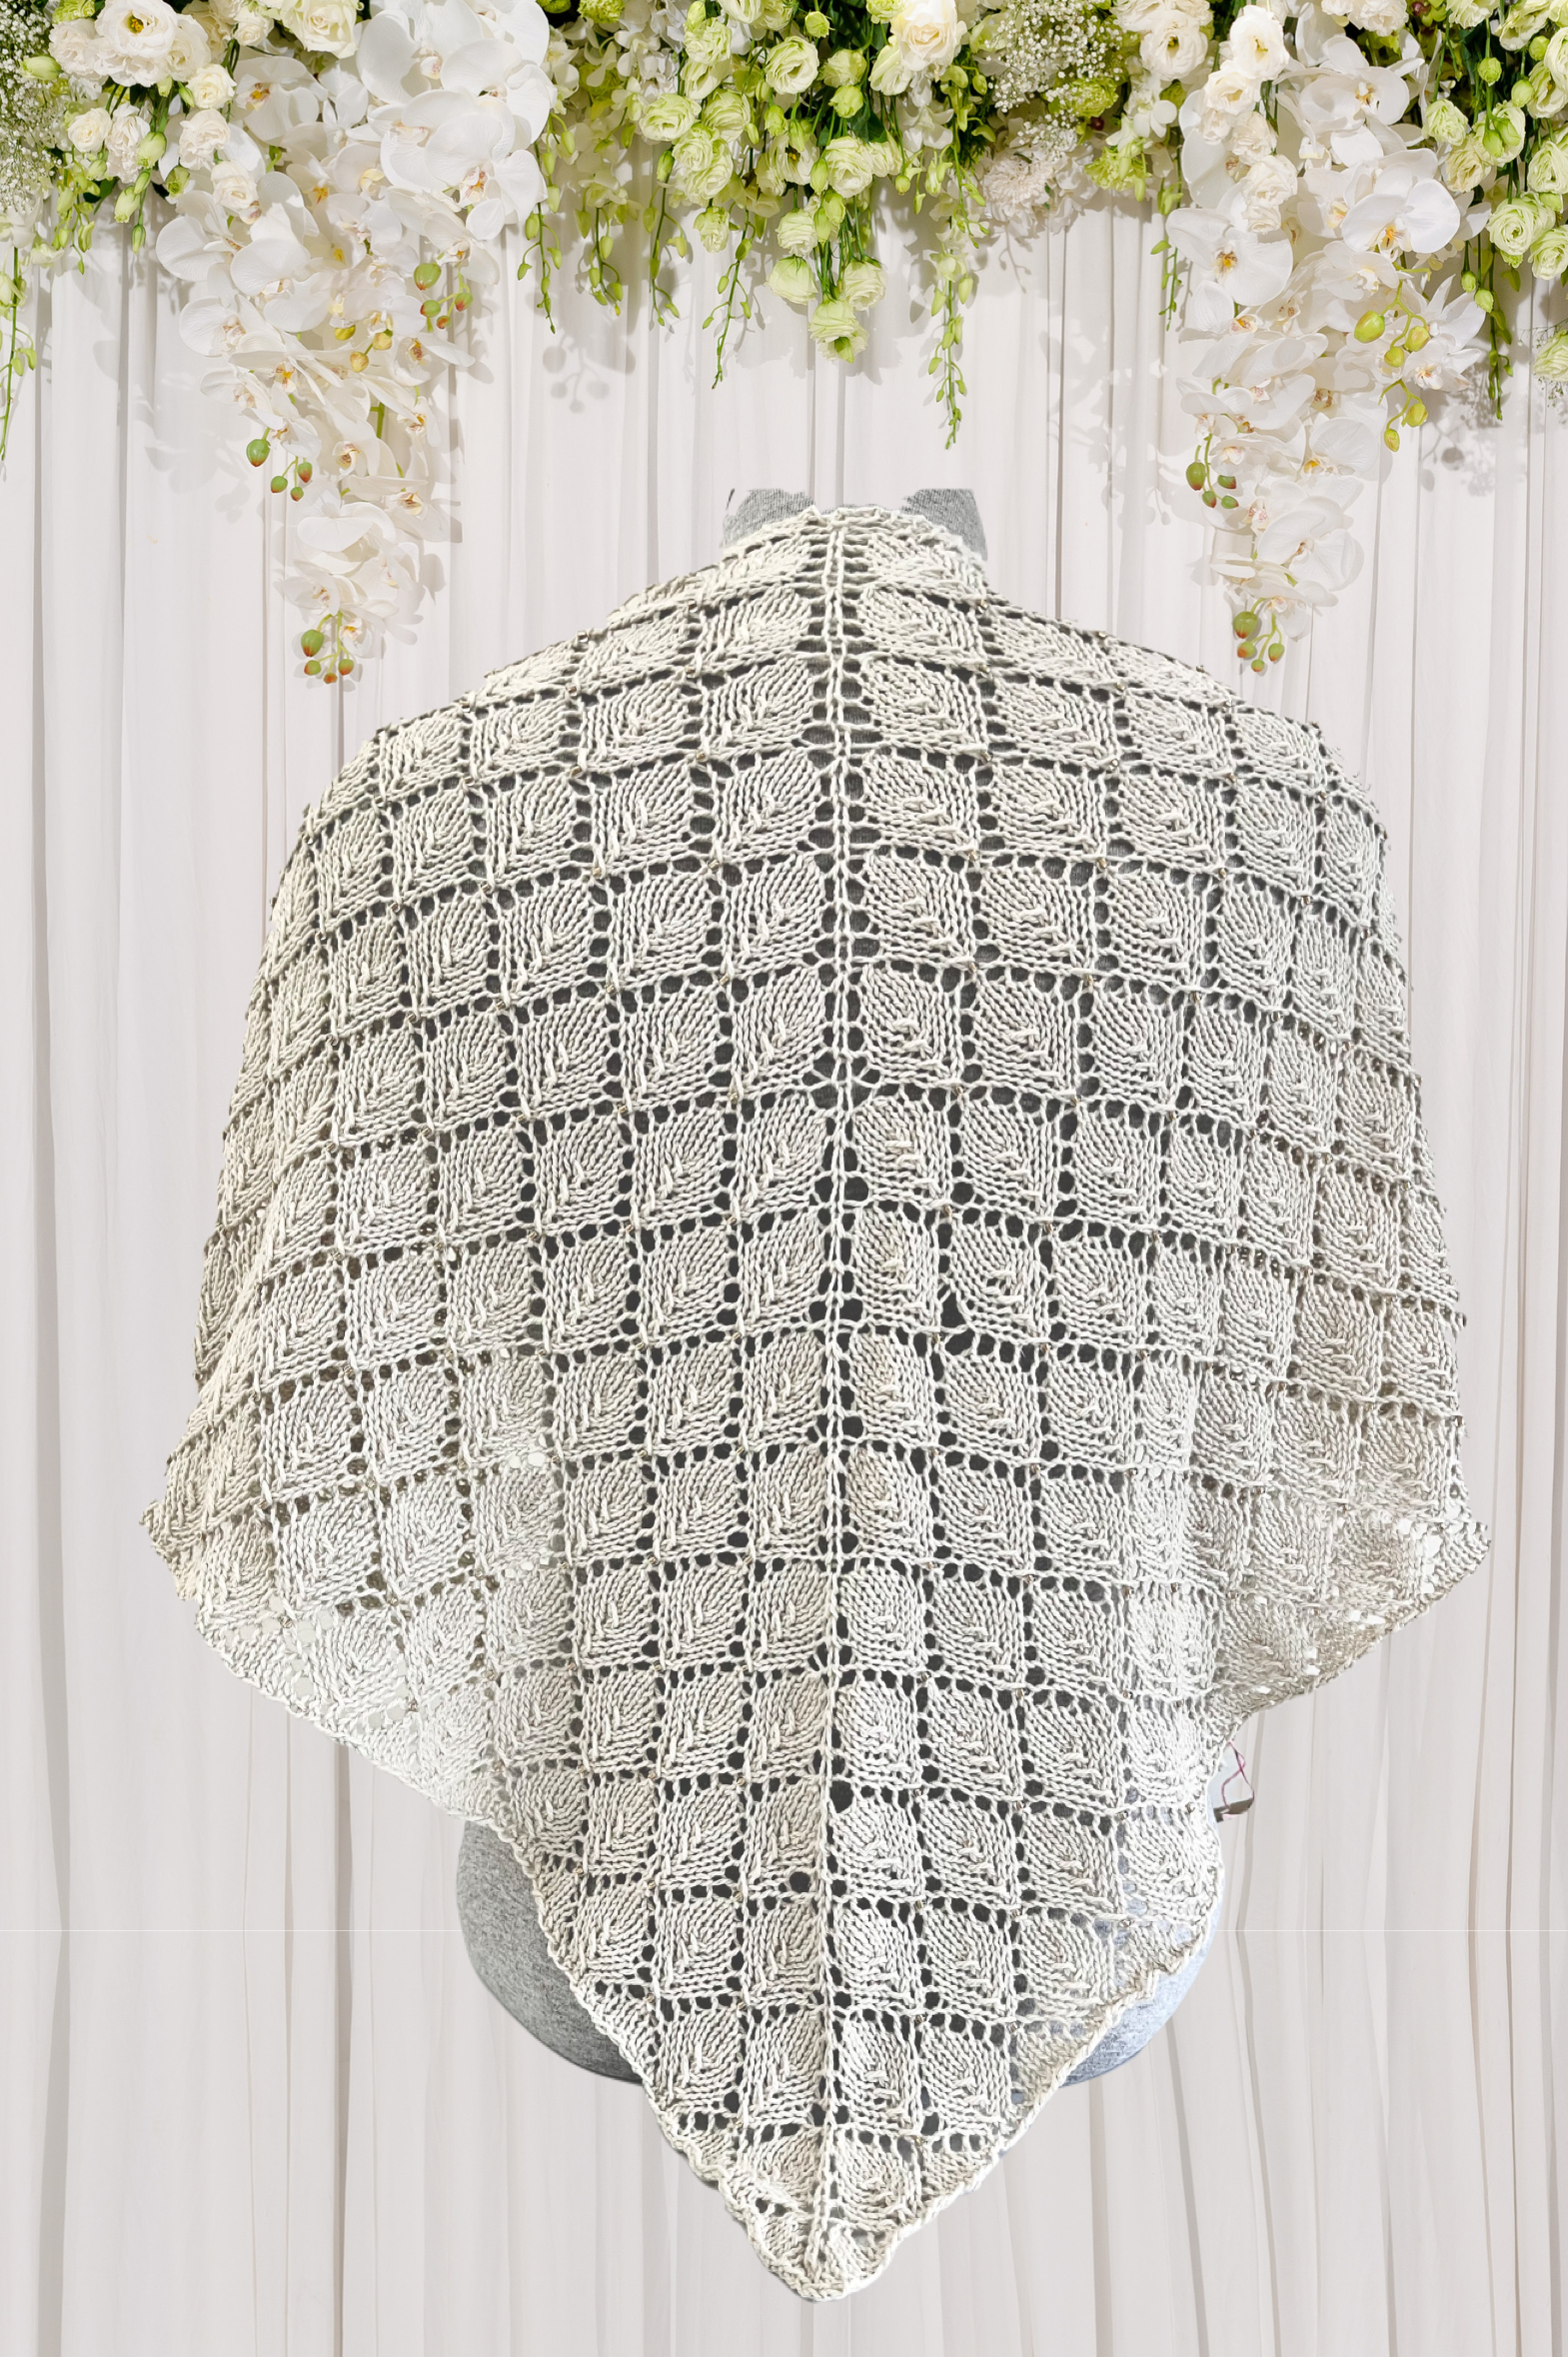 An organic merino/cotton beaded shawl is hand knit in a stunning leaf lace pattern, with subtle coordinating Czech glass beads. It is shown over a wedding dress, with a white fabric draping in the background with white flowers draped over it.